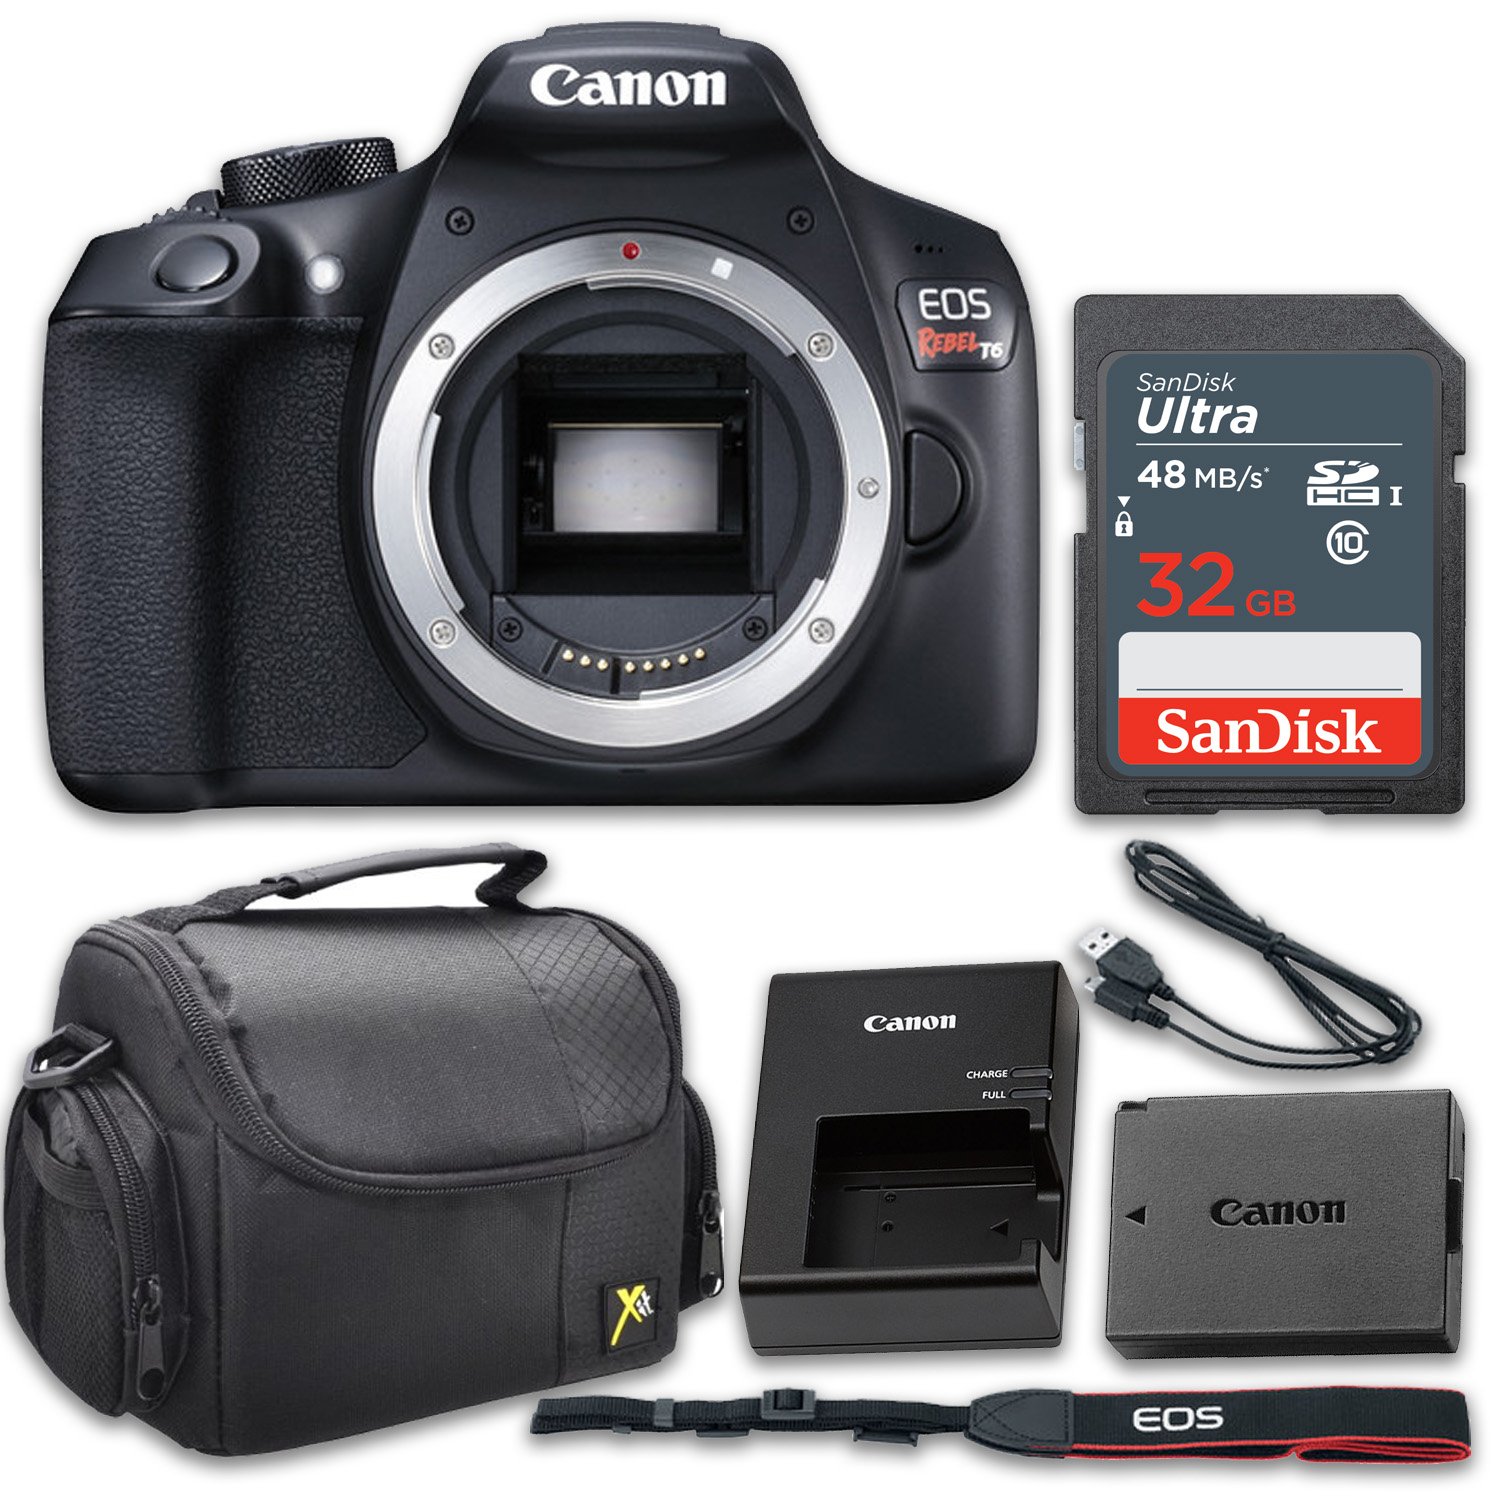 Canon EOS Rebel T6 DSLR Camera with 32GB Memory Card and Gadget Bag